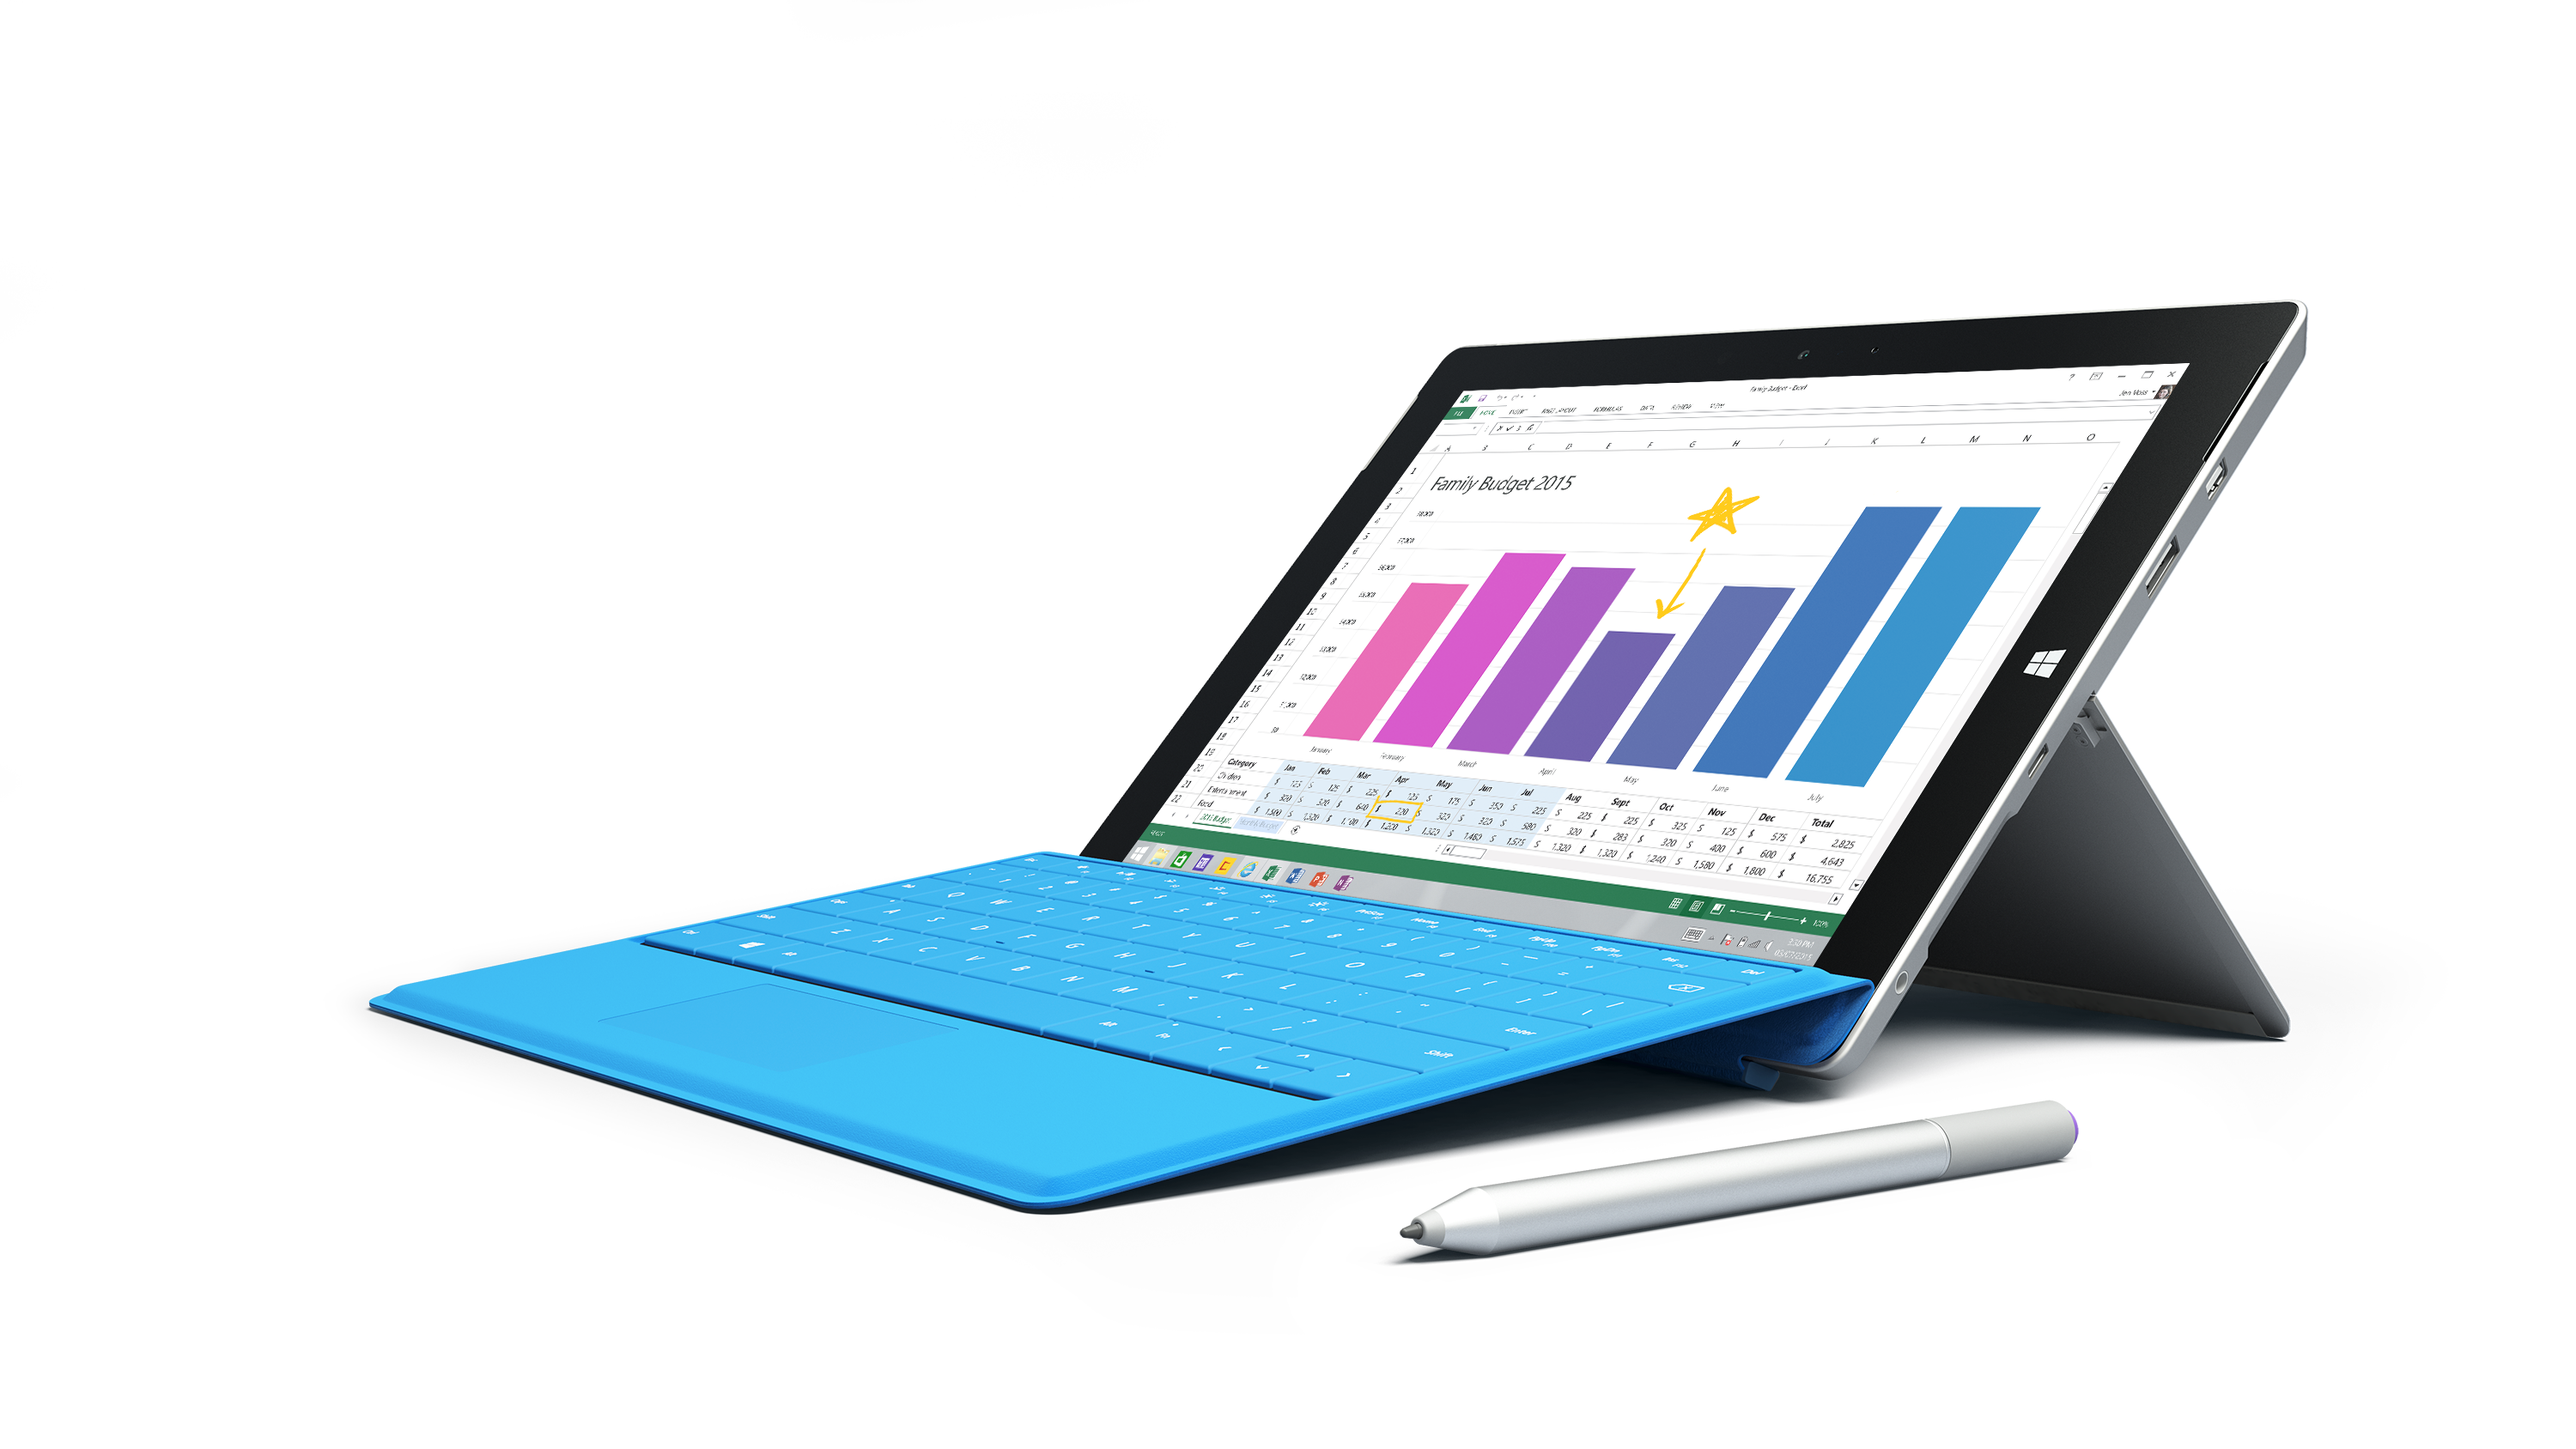 Surface 3 4G LTE Bright Blue